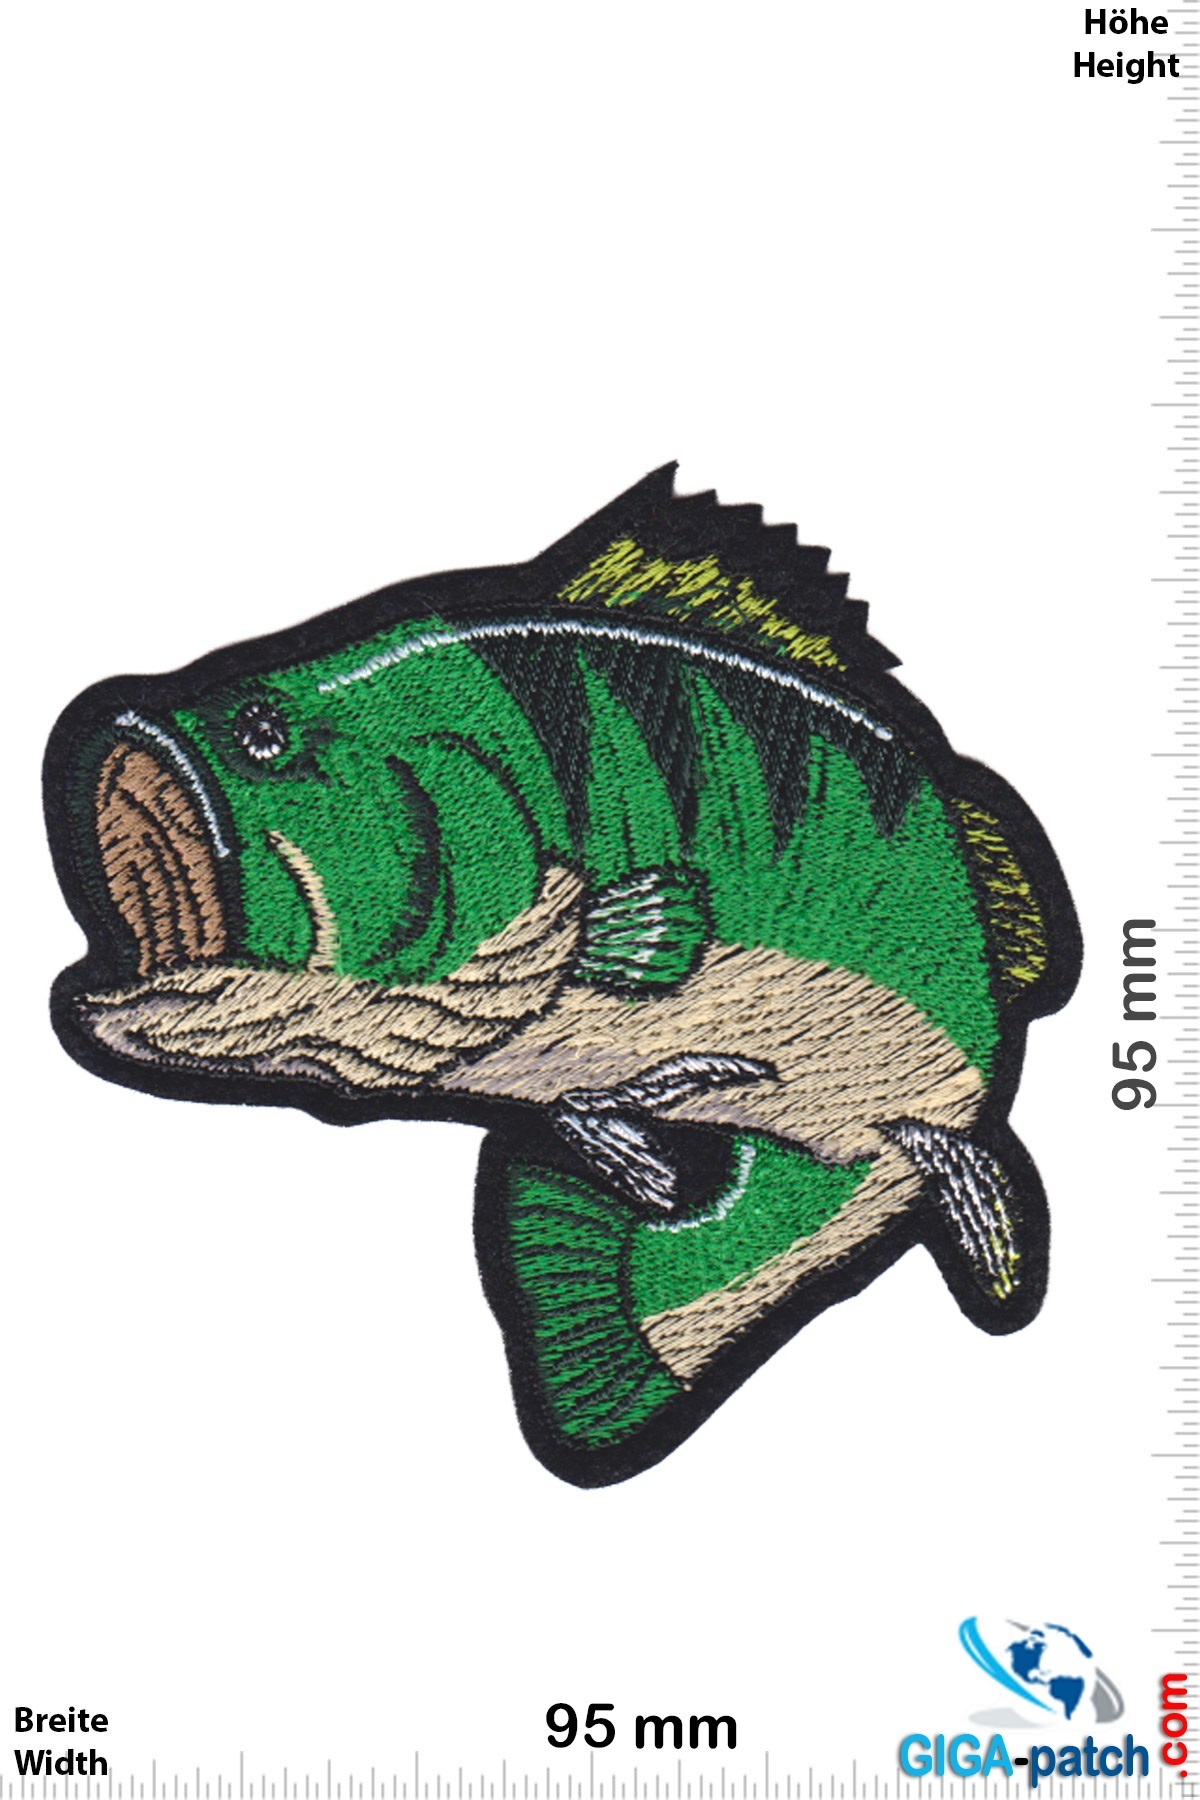 Fisch - Perch - fishing fish - green- Patch - Back Patches - Patch  Keychains Stickers -  - Biggest Patch Shop worldwide